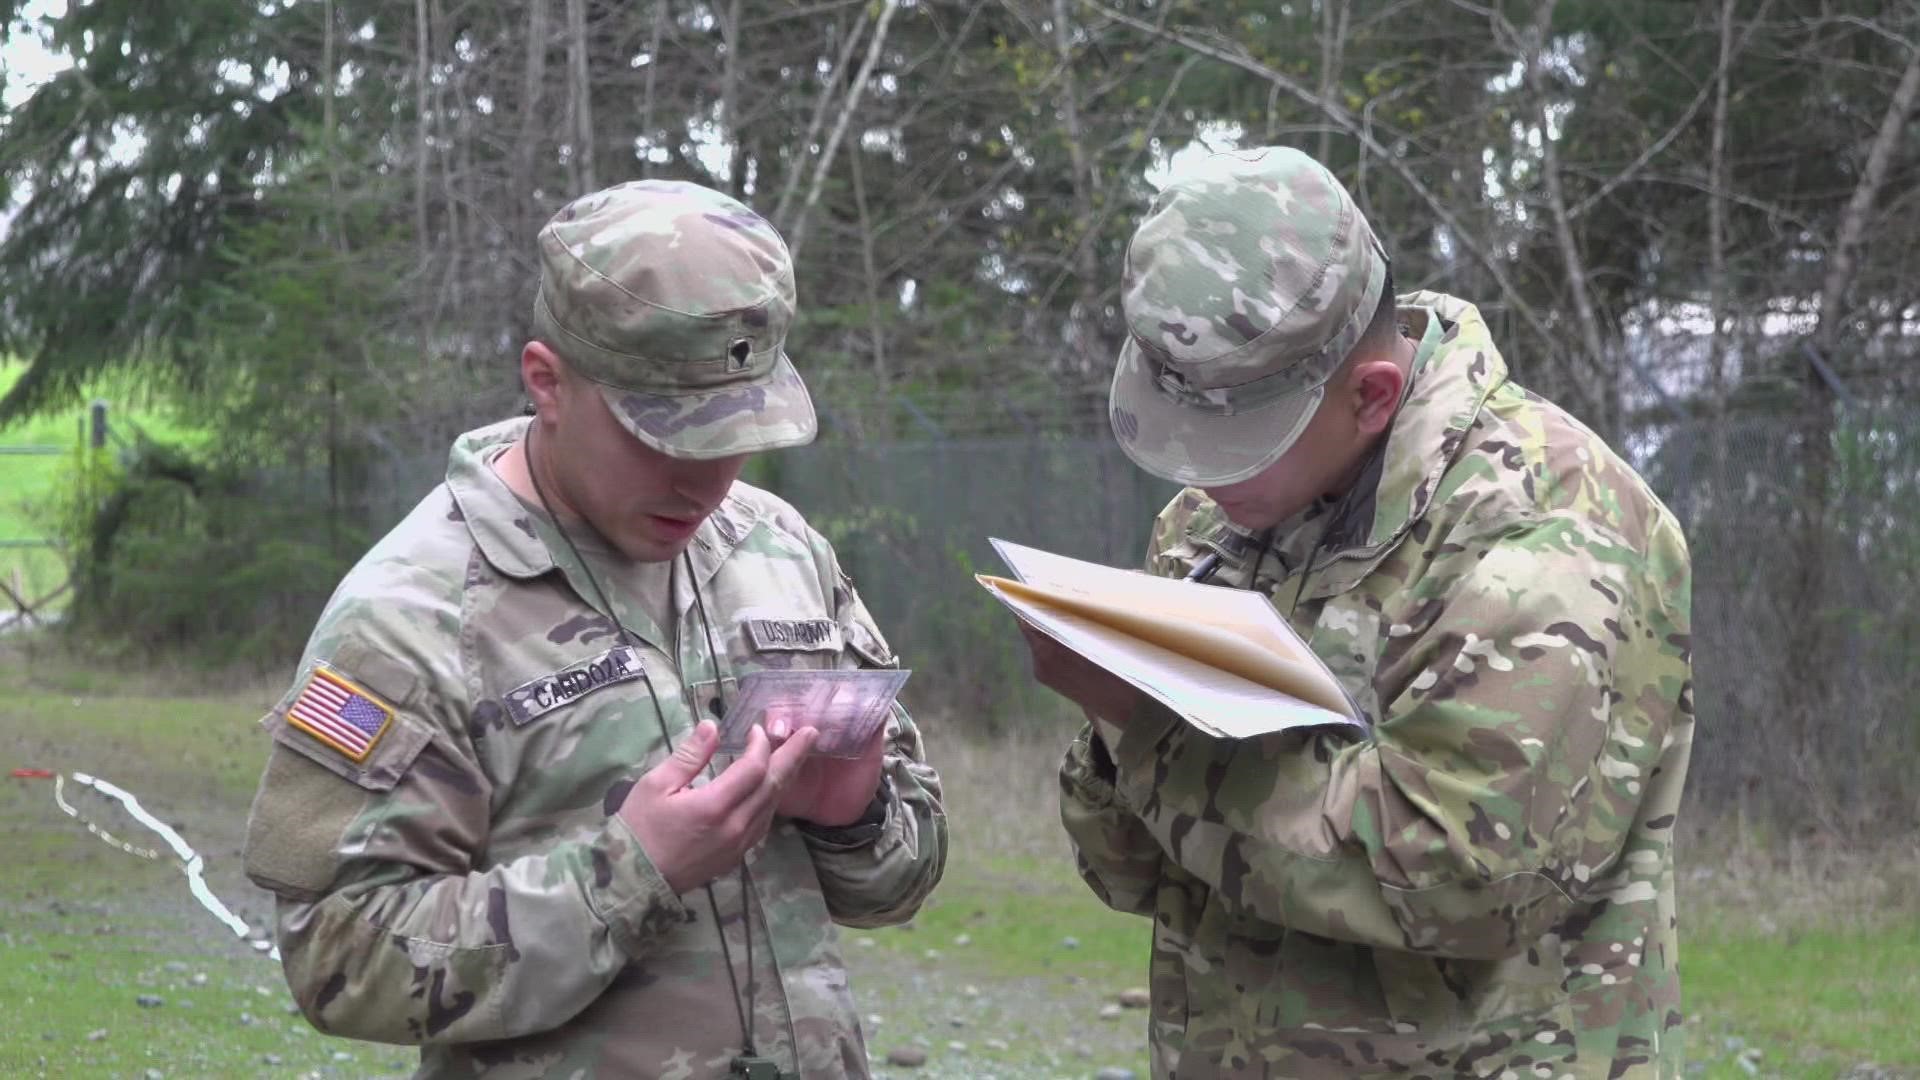 It's preparing them for the US Army's elite Sapper Leader Course and helping graduates serve as mentors for other members of the 1-2 Stryker Brigade Combat Team.